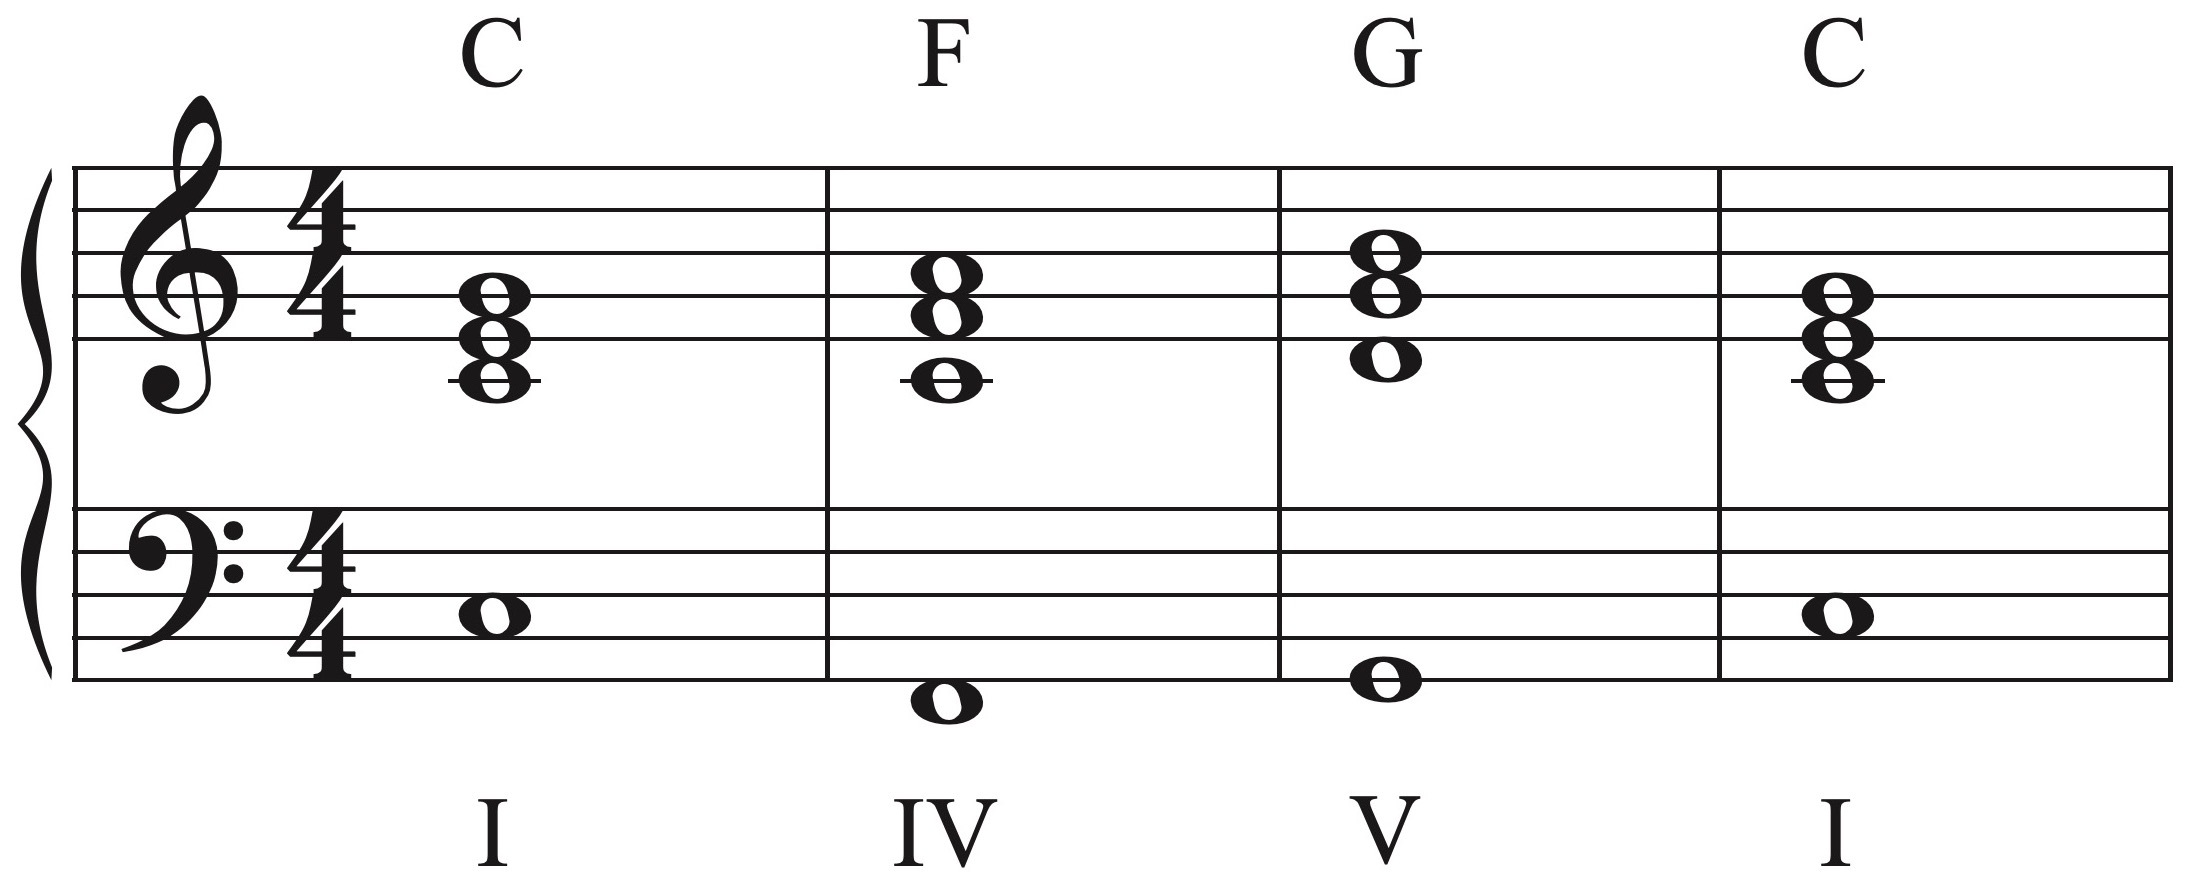 I-IV-V-I chords for piano players in the key of C major.